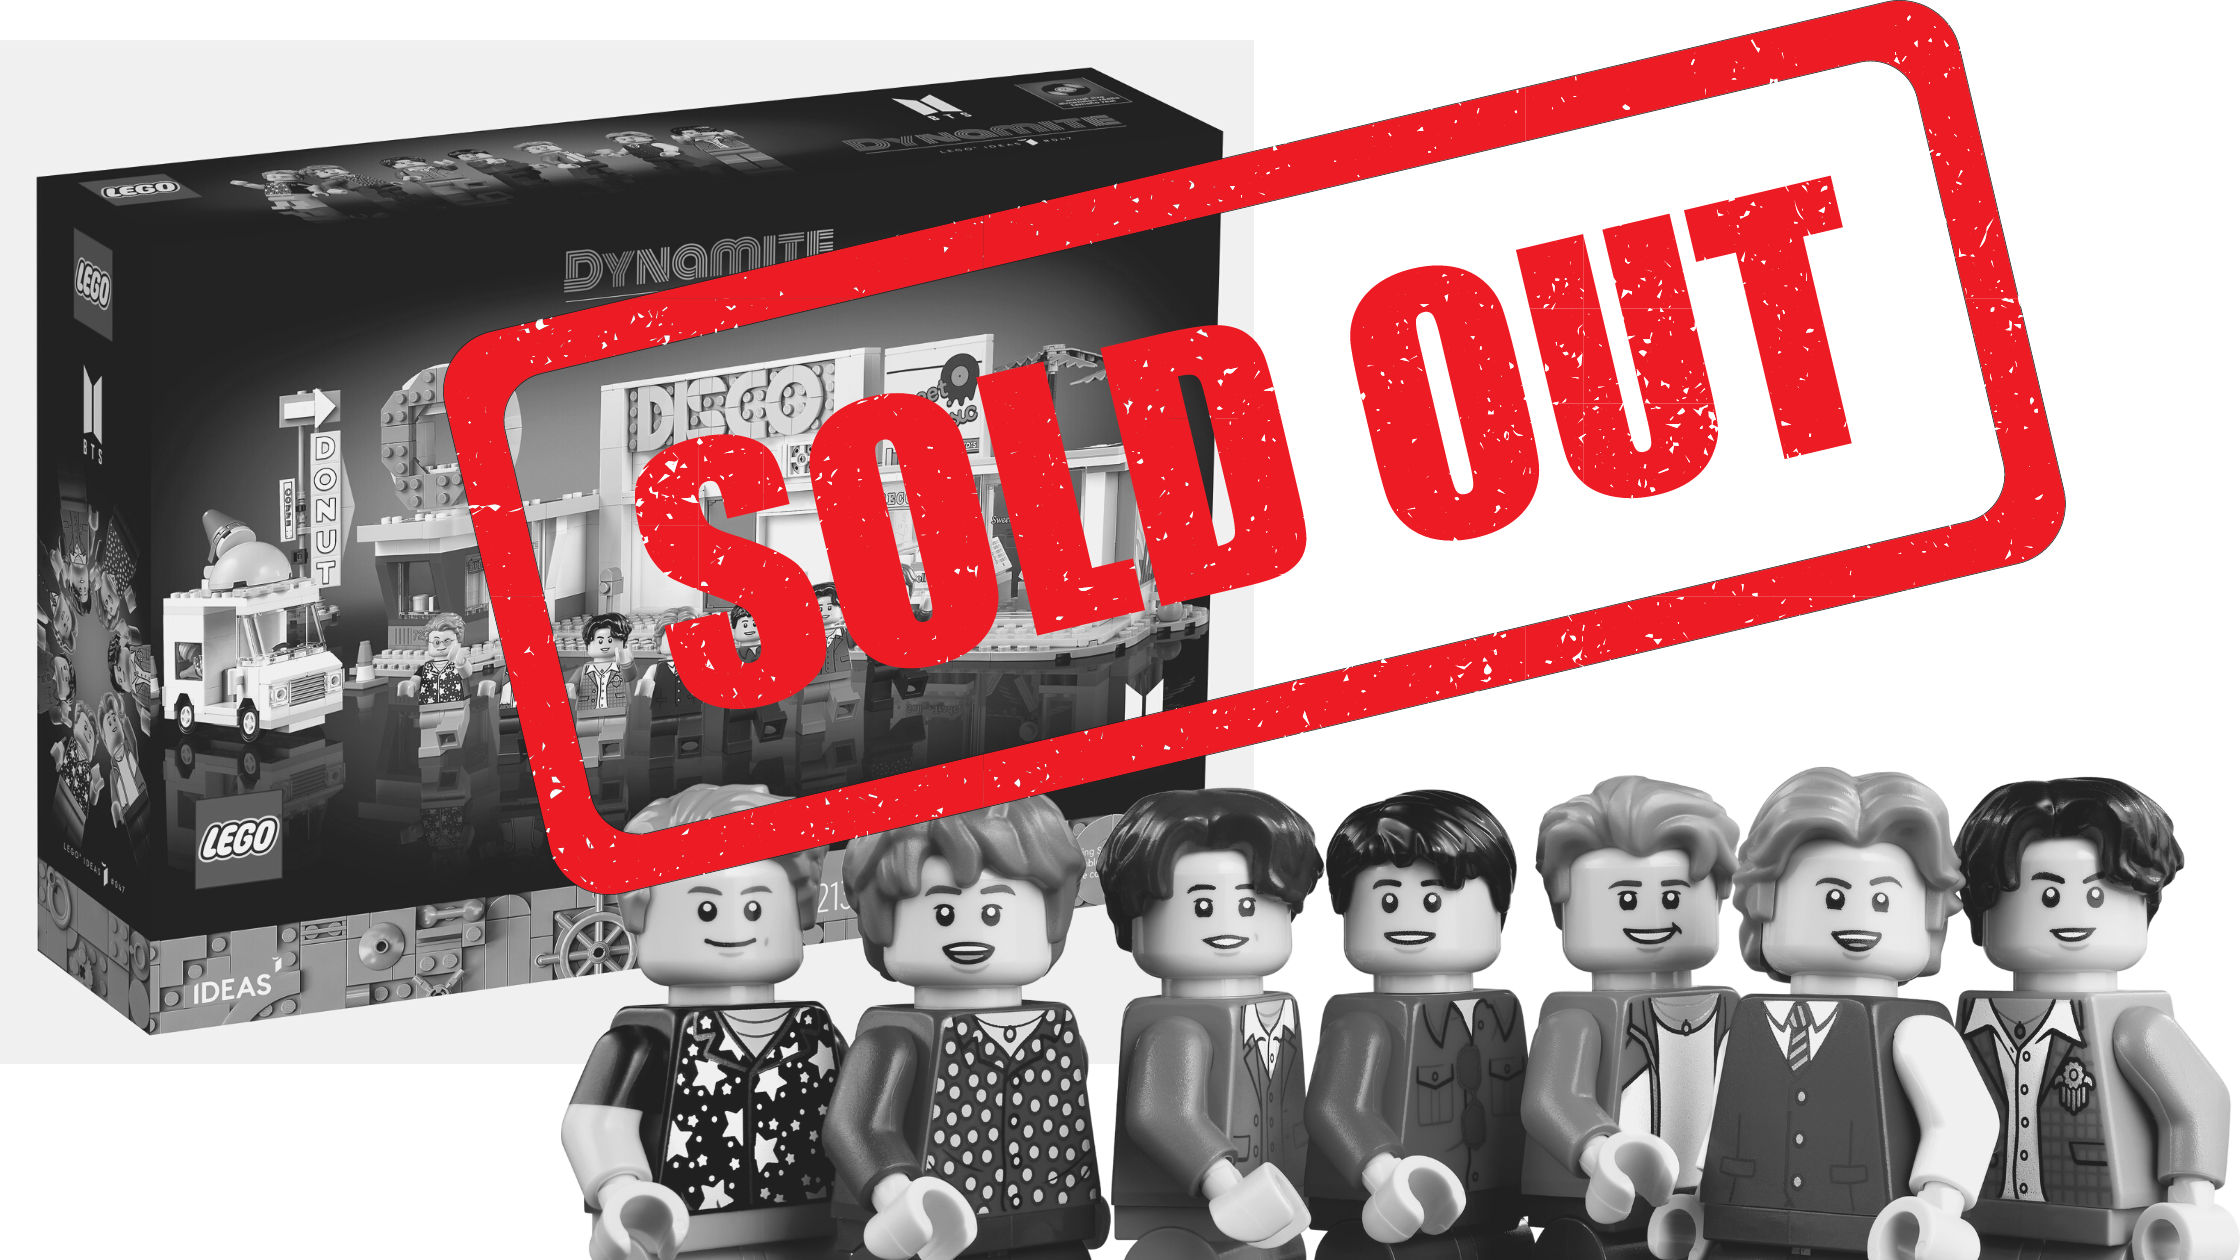 Restock! One of the most requested restocks is now available! #lego #